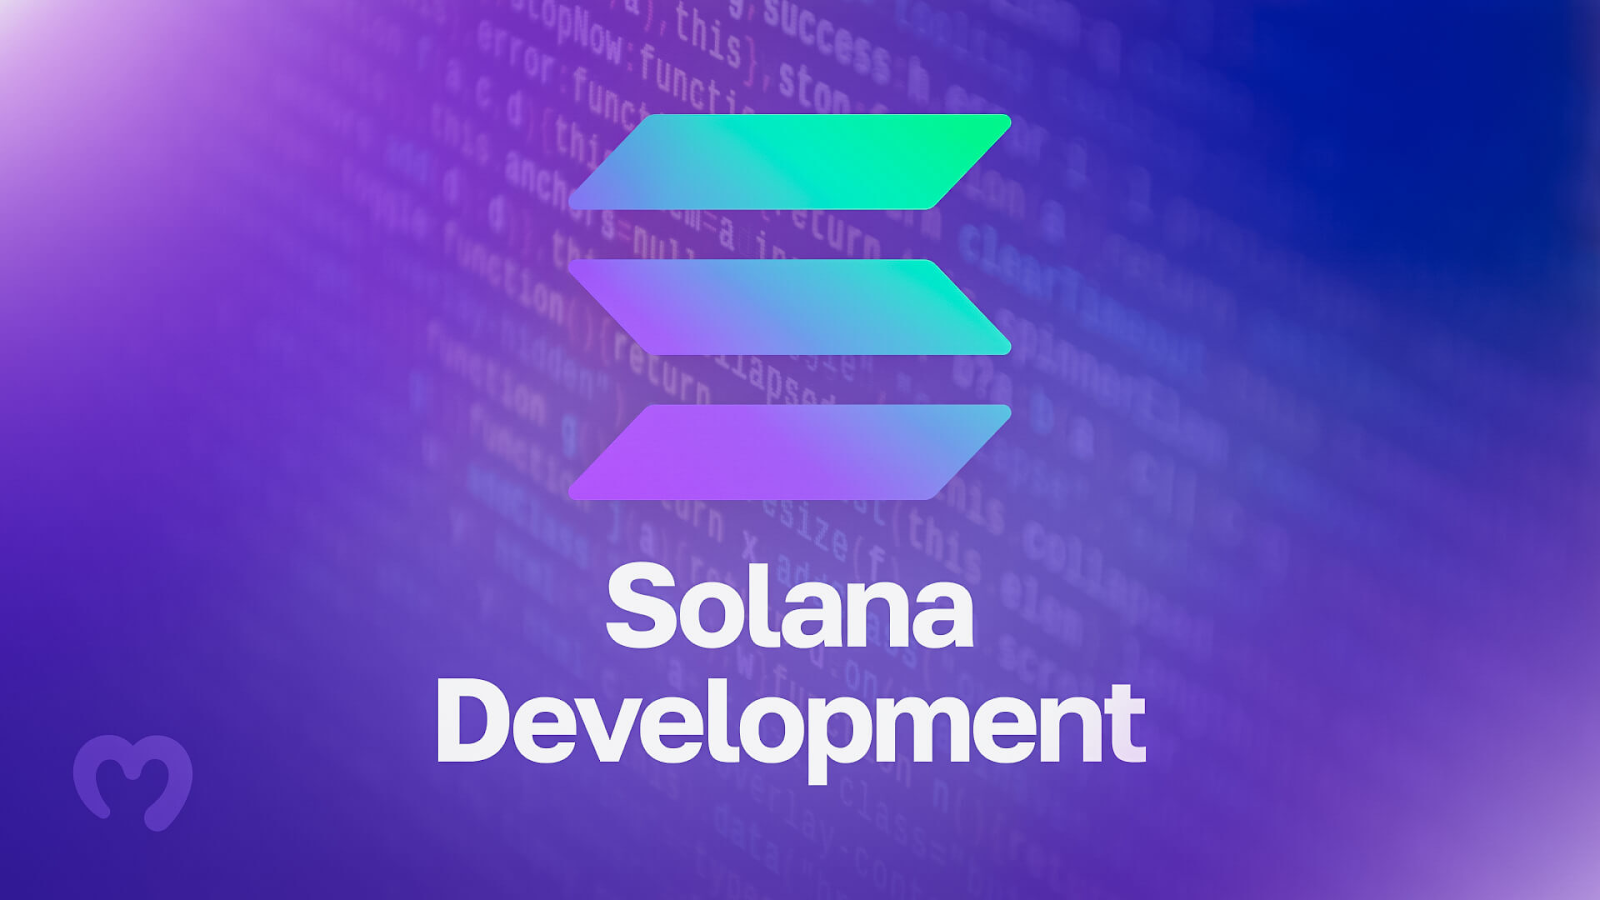 Want to explore Solana development? Learning more about dapps on Solana is a great first step!